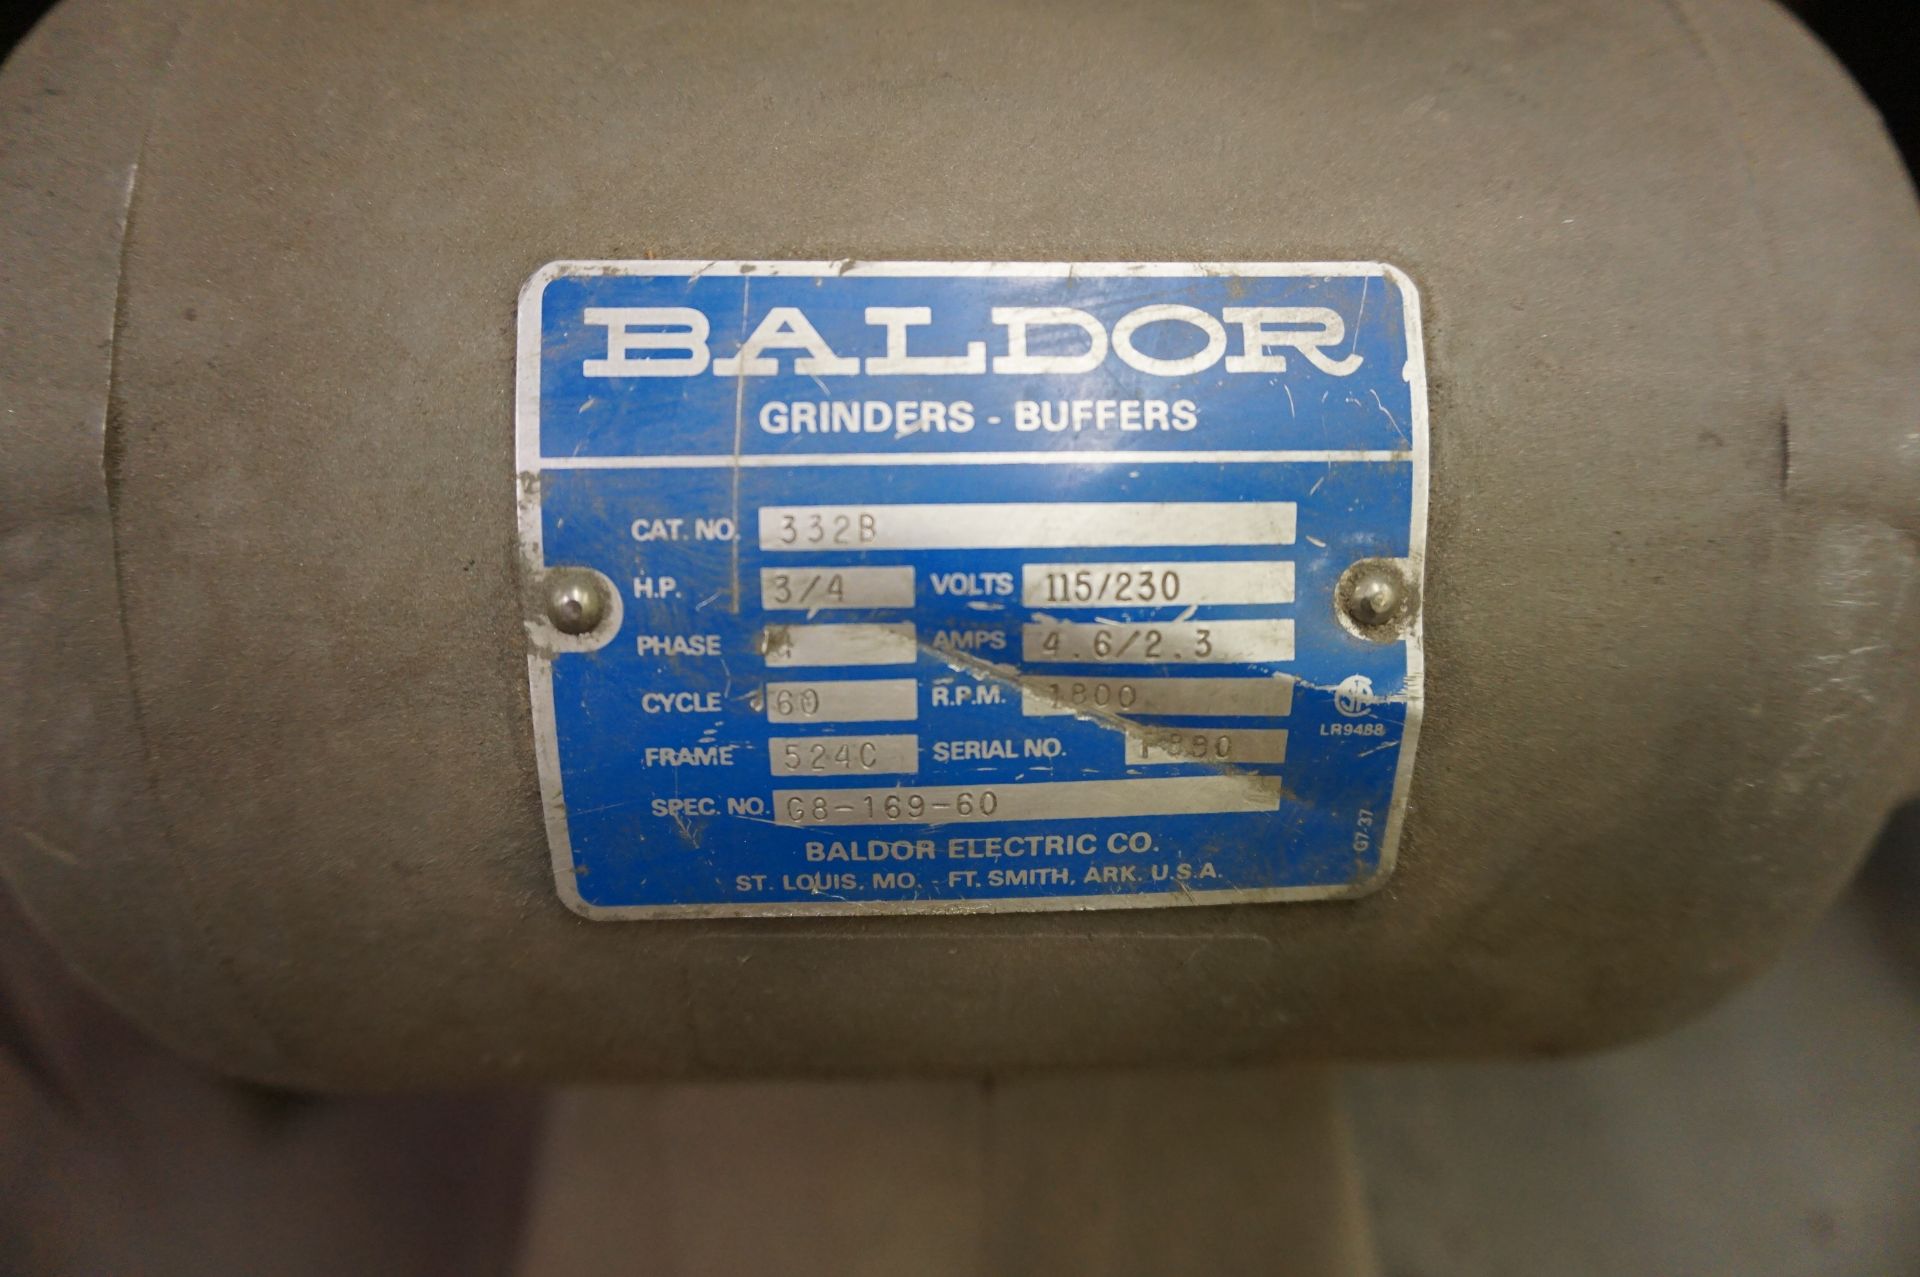 ROLLING CABINET WITH BALDOR 332B BUFFER AND MISC. SPARE BUFFING DISCS - Image 3 of 3